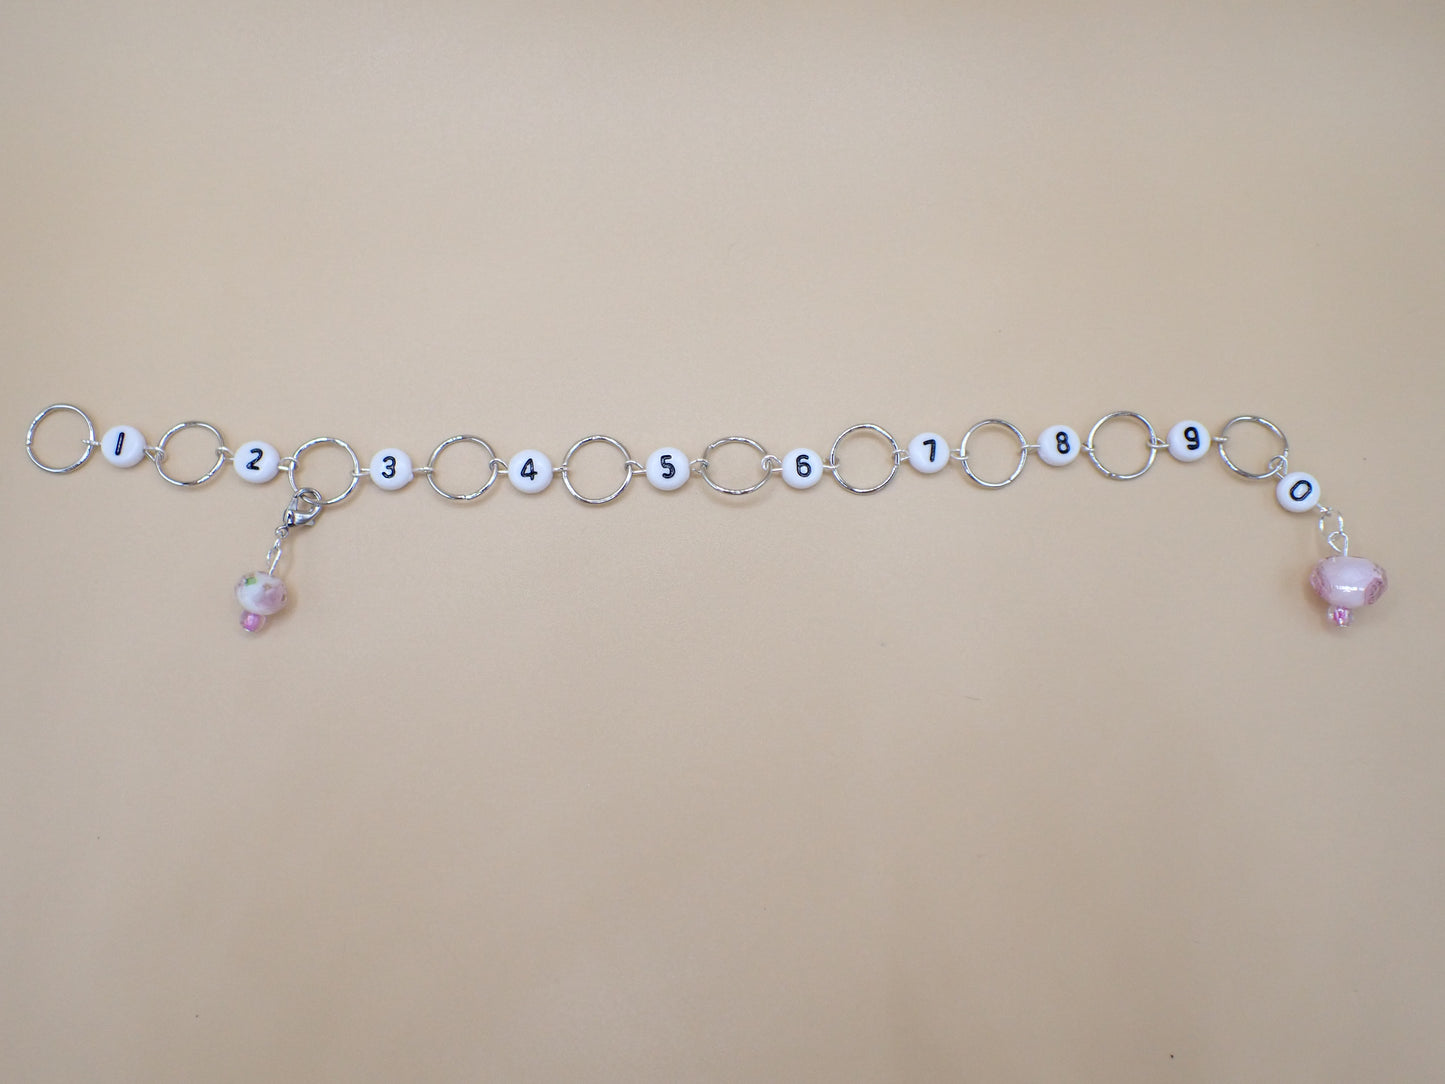 Row Counter Chain for Knit or Crochet, with Pink Floral Bead